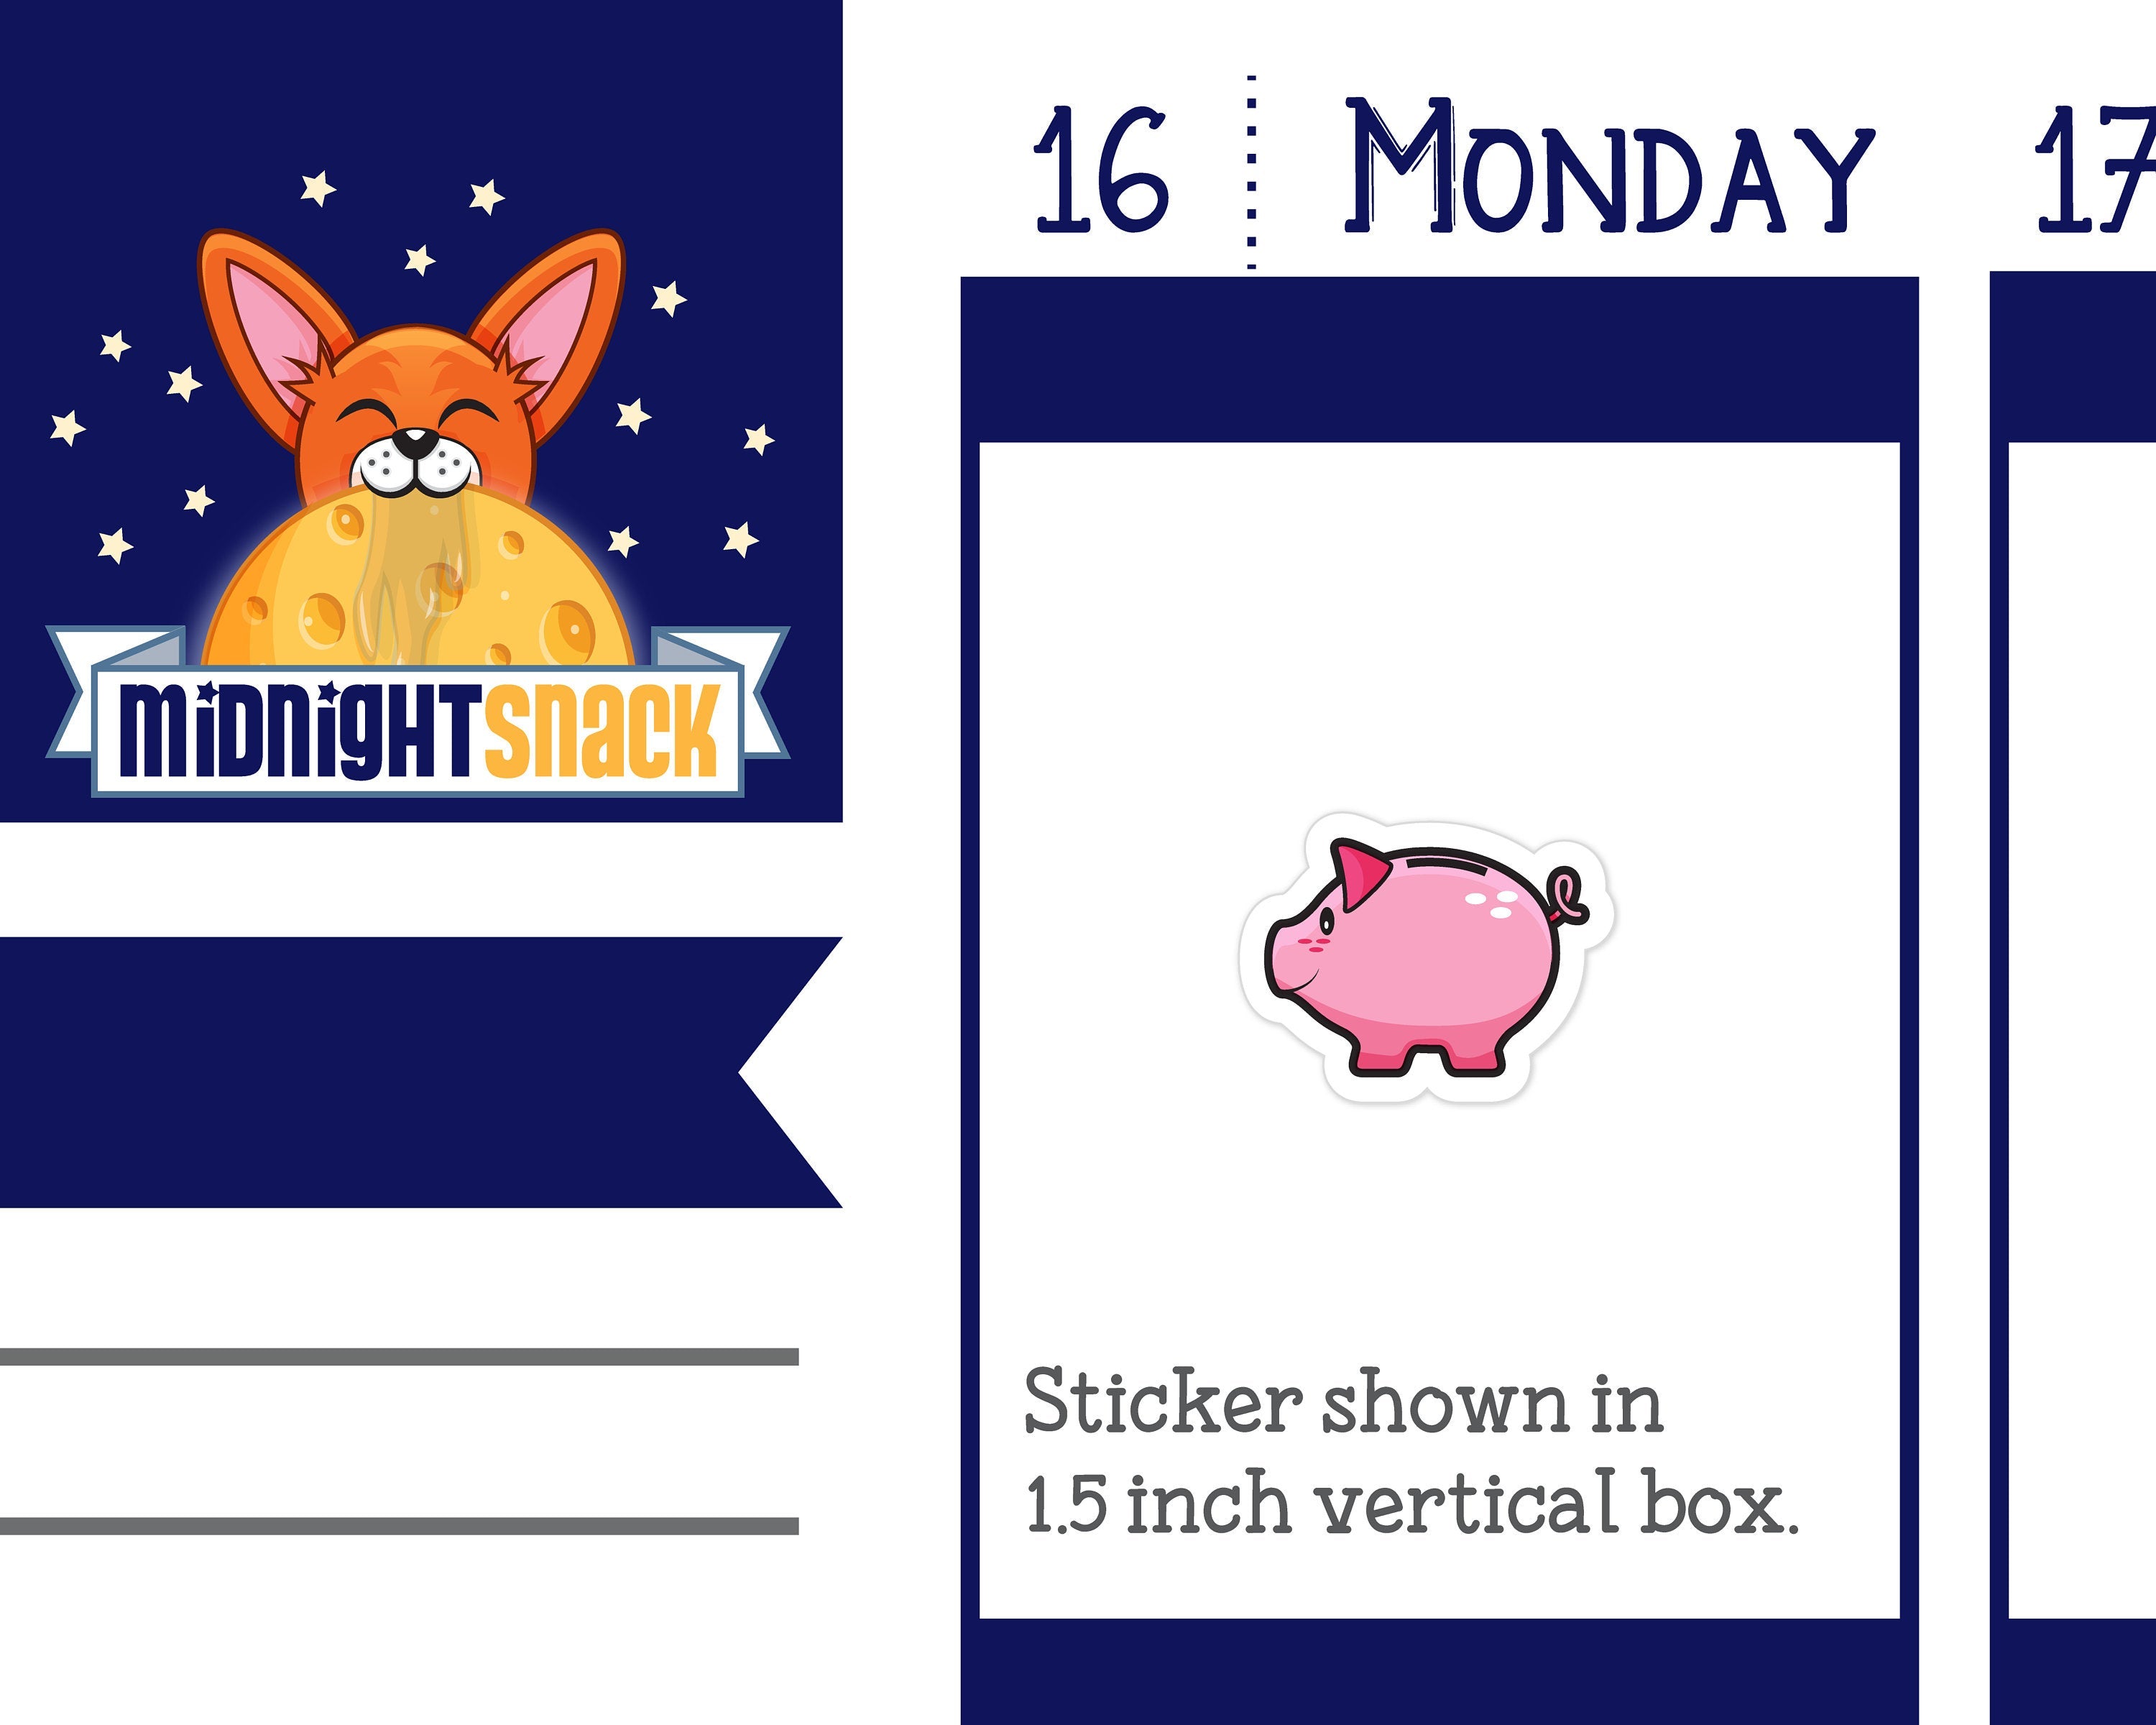 Piggy Bank Icon: Savings Account Planner Stickers Midnight Snack Planner